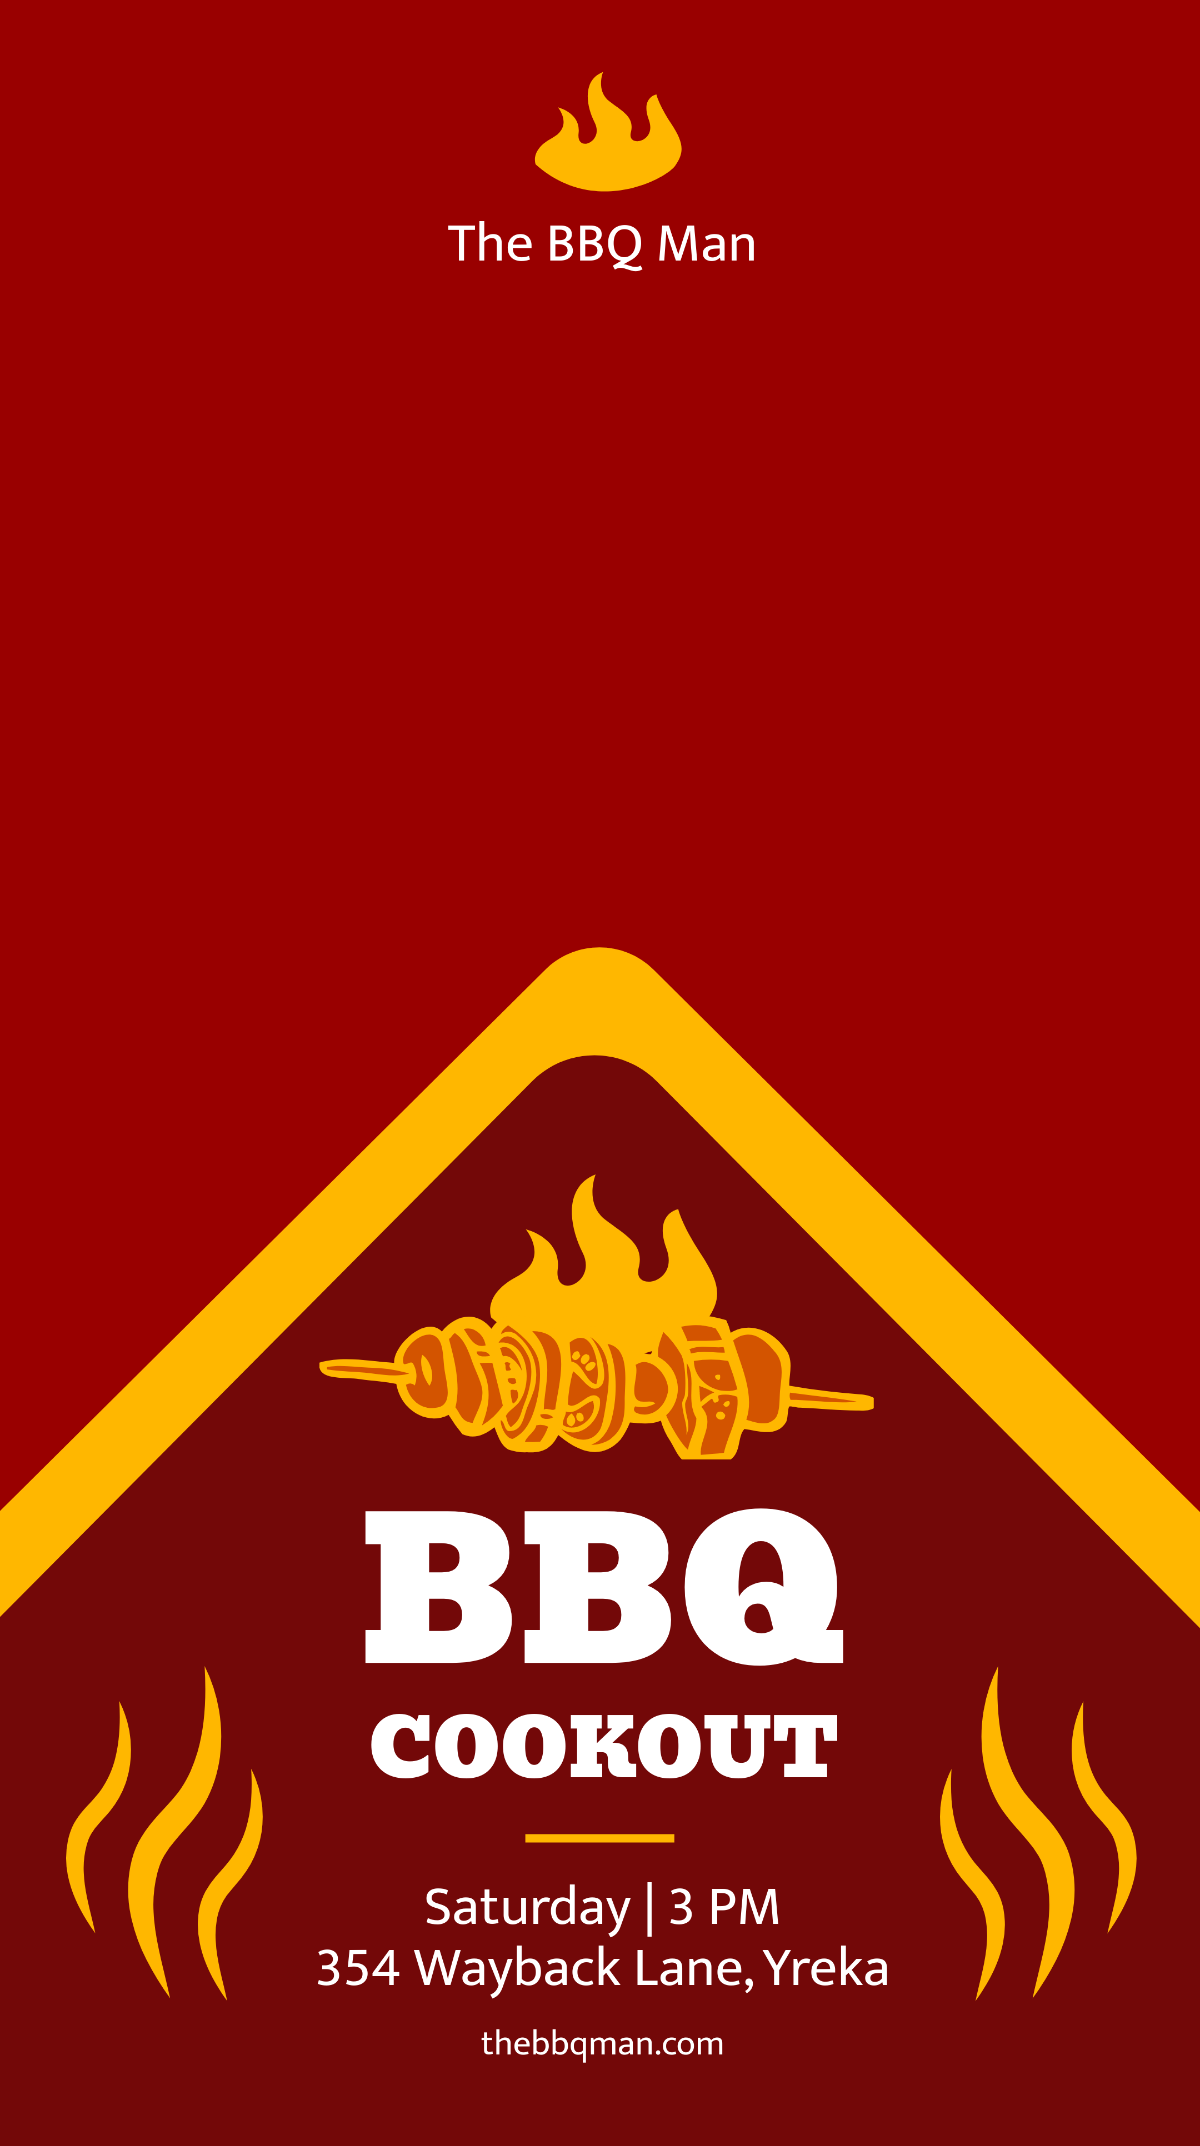 BBQ Cookout Snapchat Geofilter